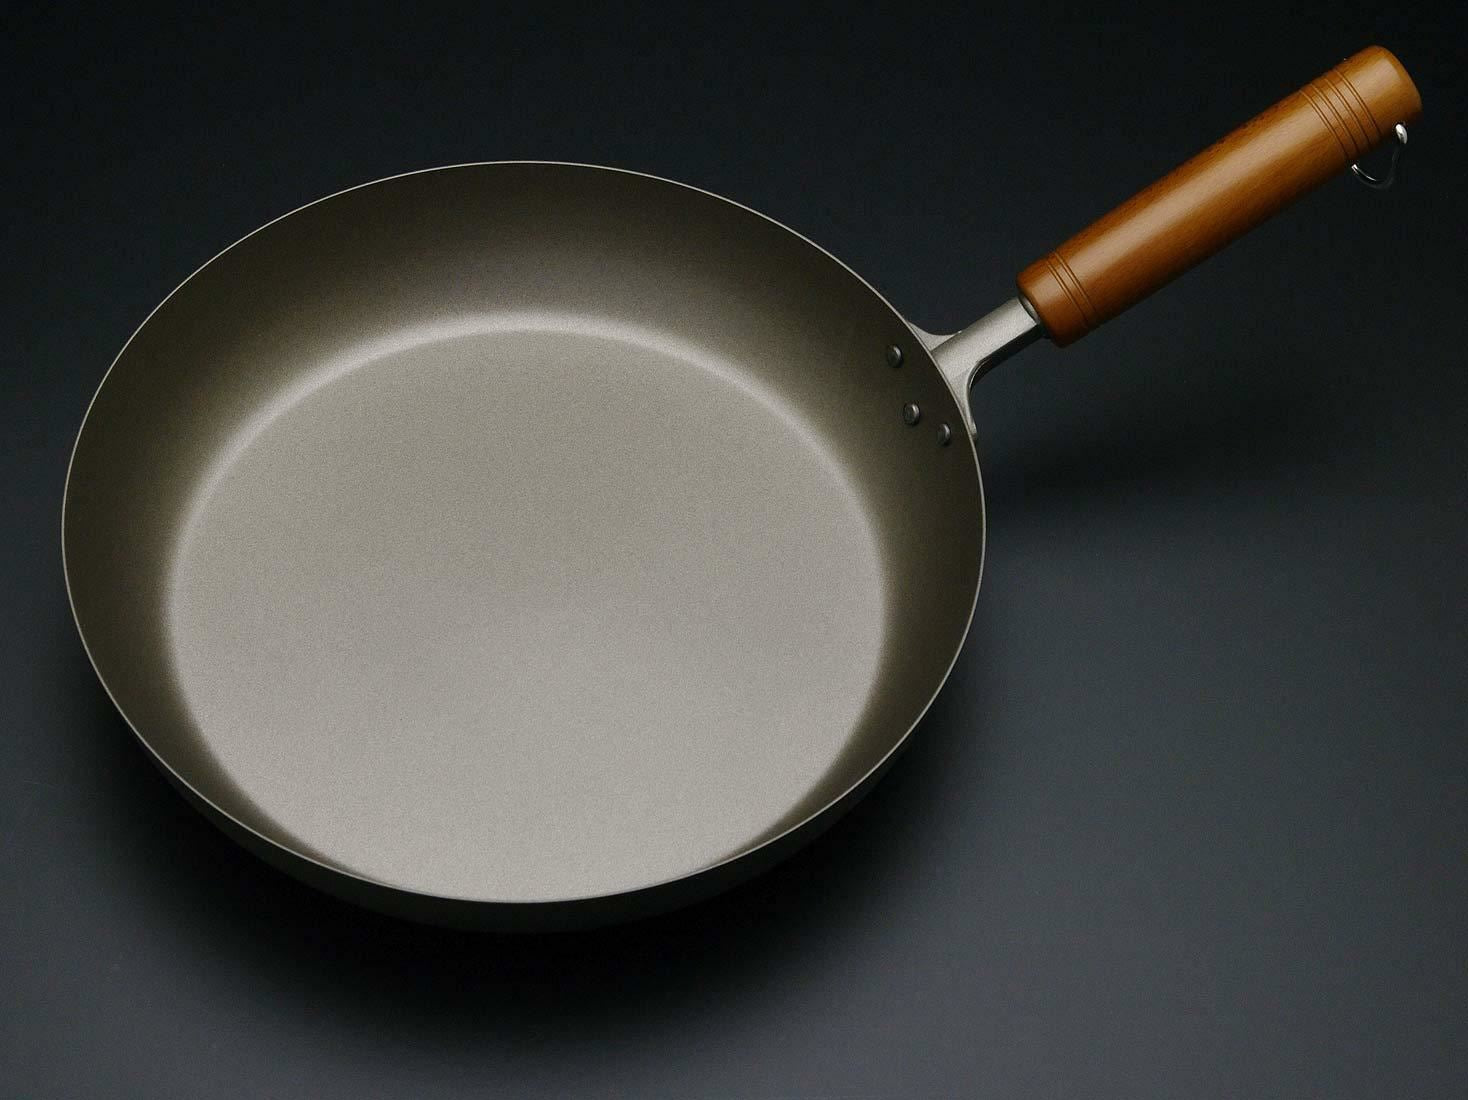 Pure Titanium Frying pan with wooden handle Amazing Lightweight